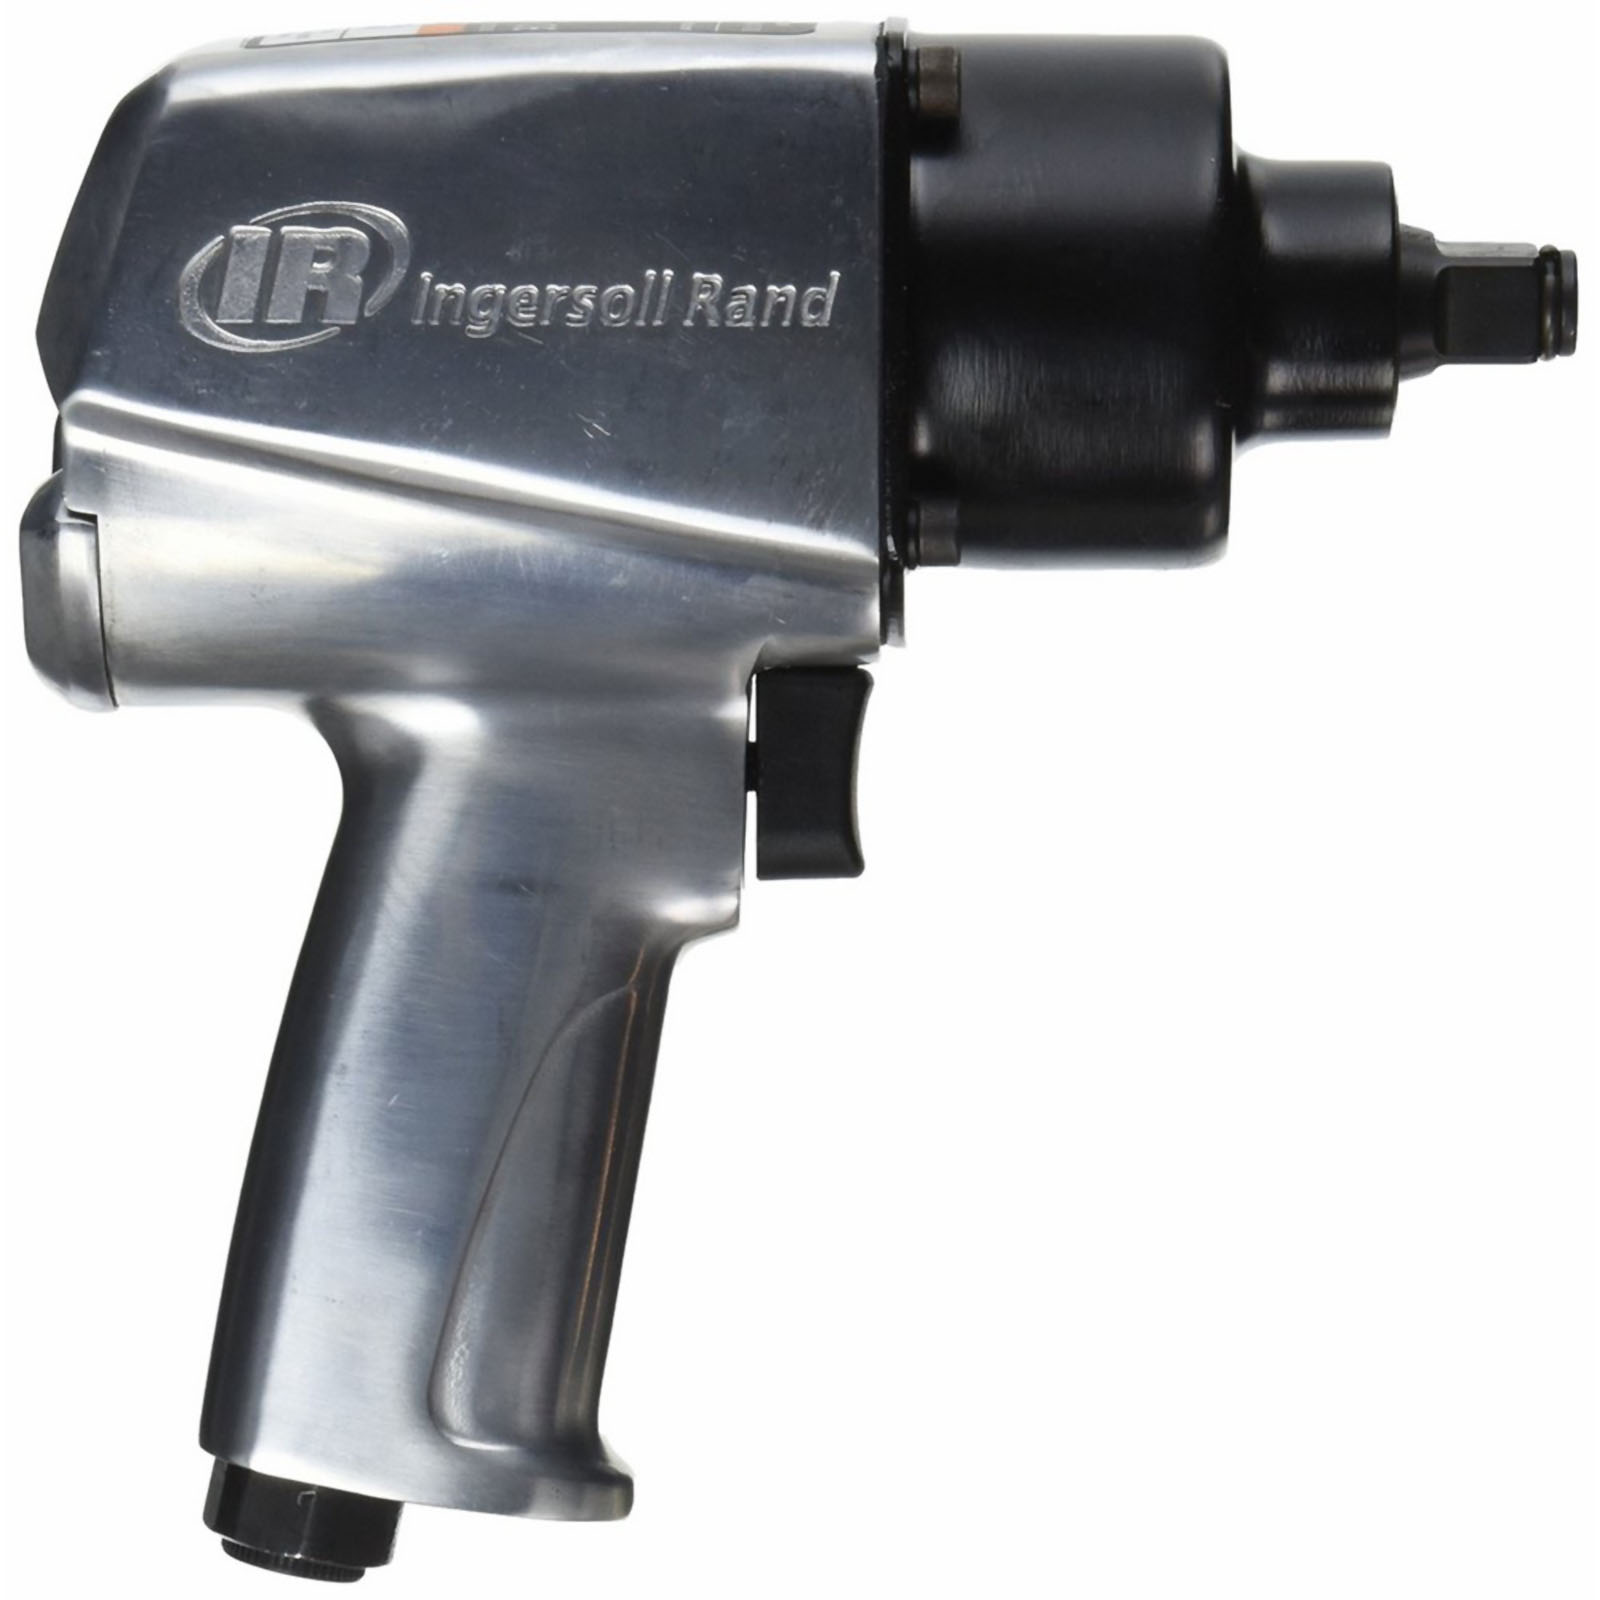 Ingersoll Rand 236 1/2" Air Impact Wrench